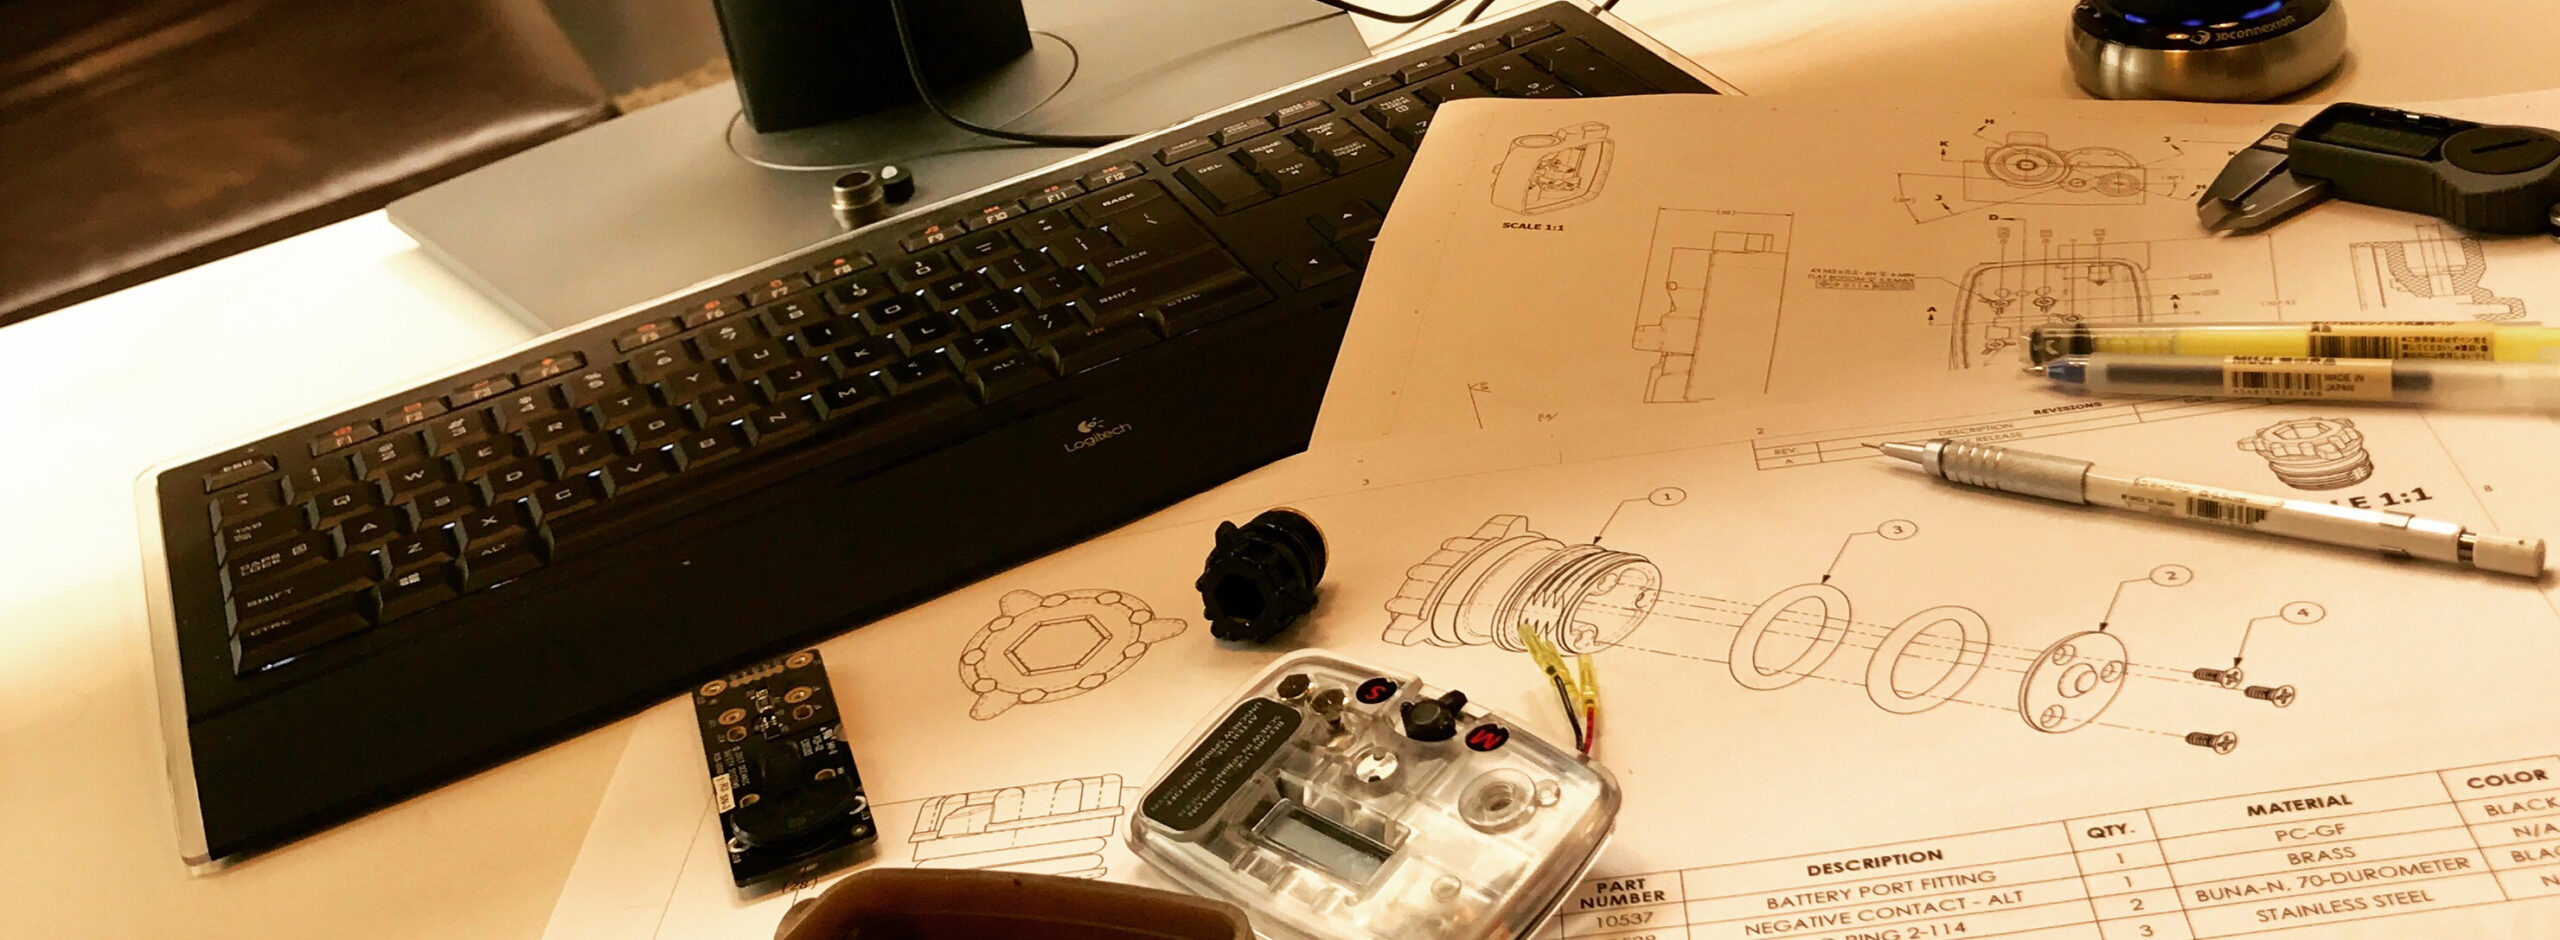 Various tools and sketches of a product in the research and development phase